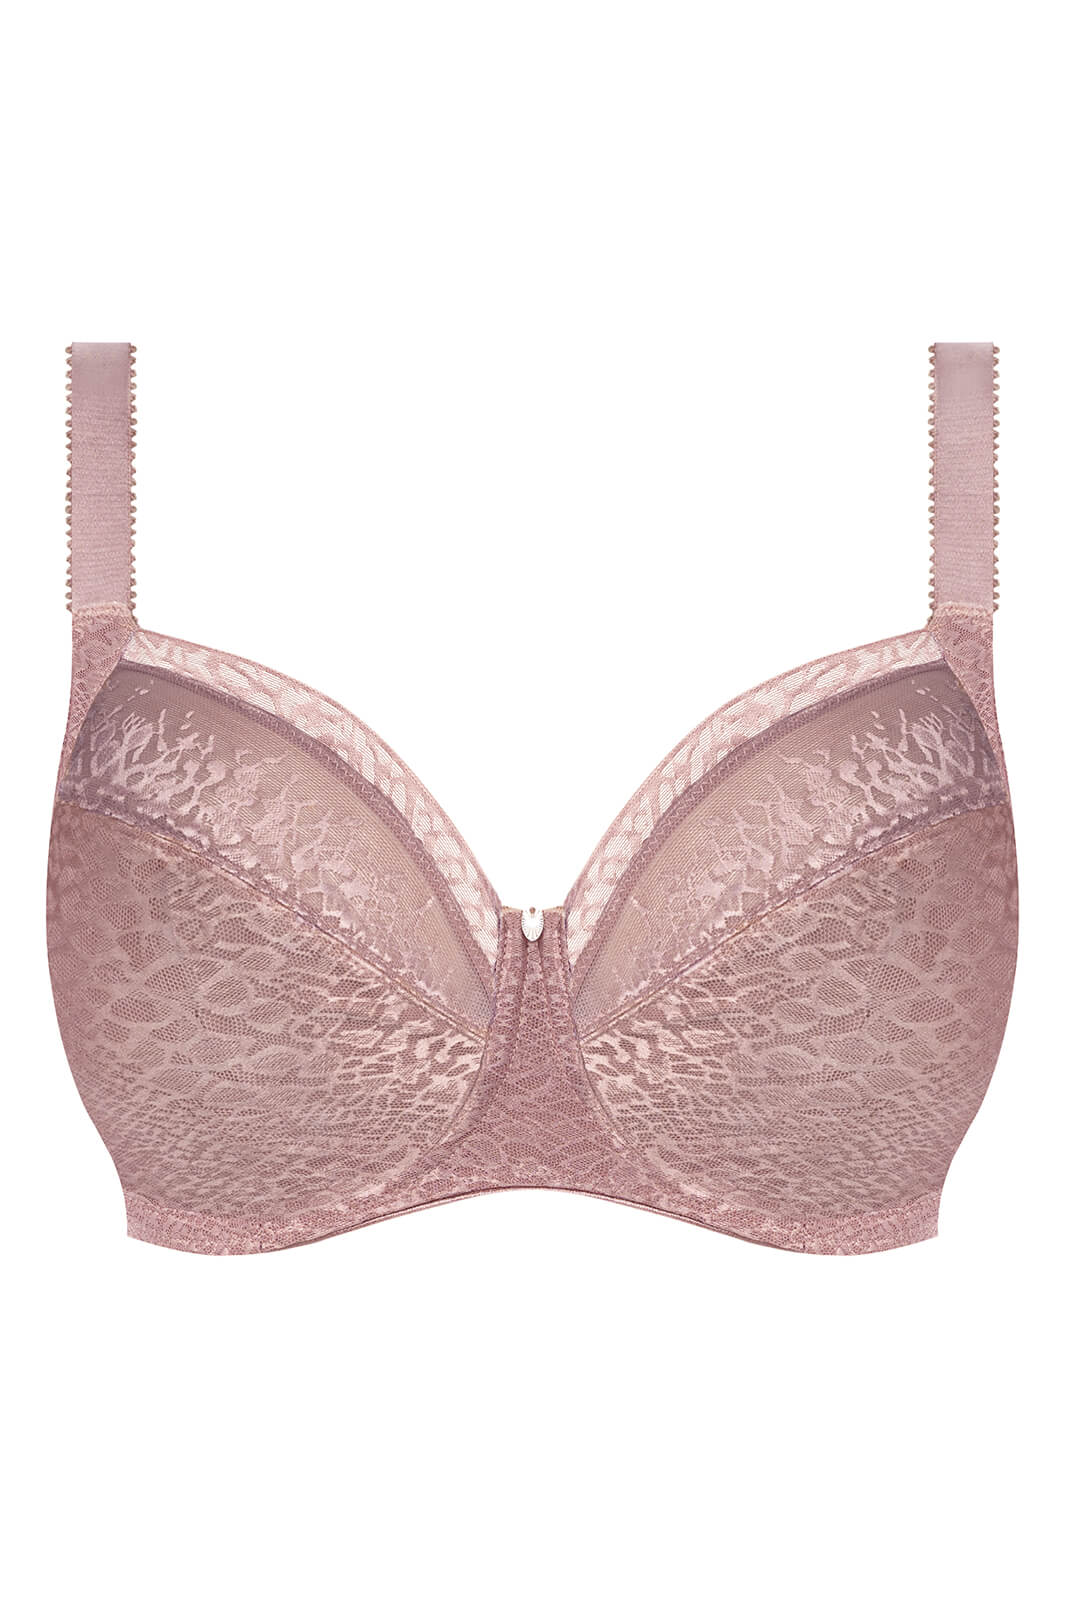 Fantasie FL6911TAE Envisage Taupe Full Cup Side Support Bra - Rouge Boutique Inverness